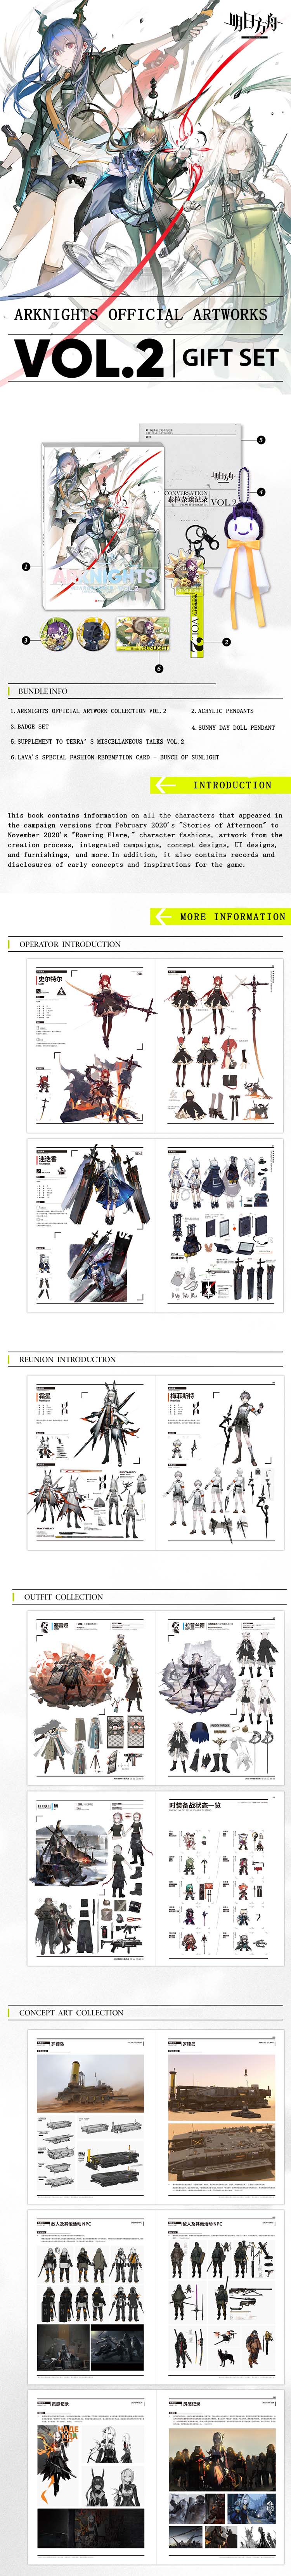 Arknights Artwork Collection Vol.2